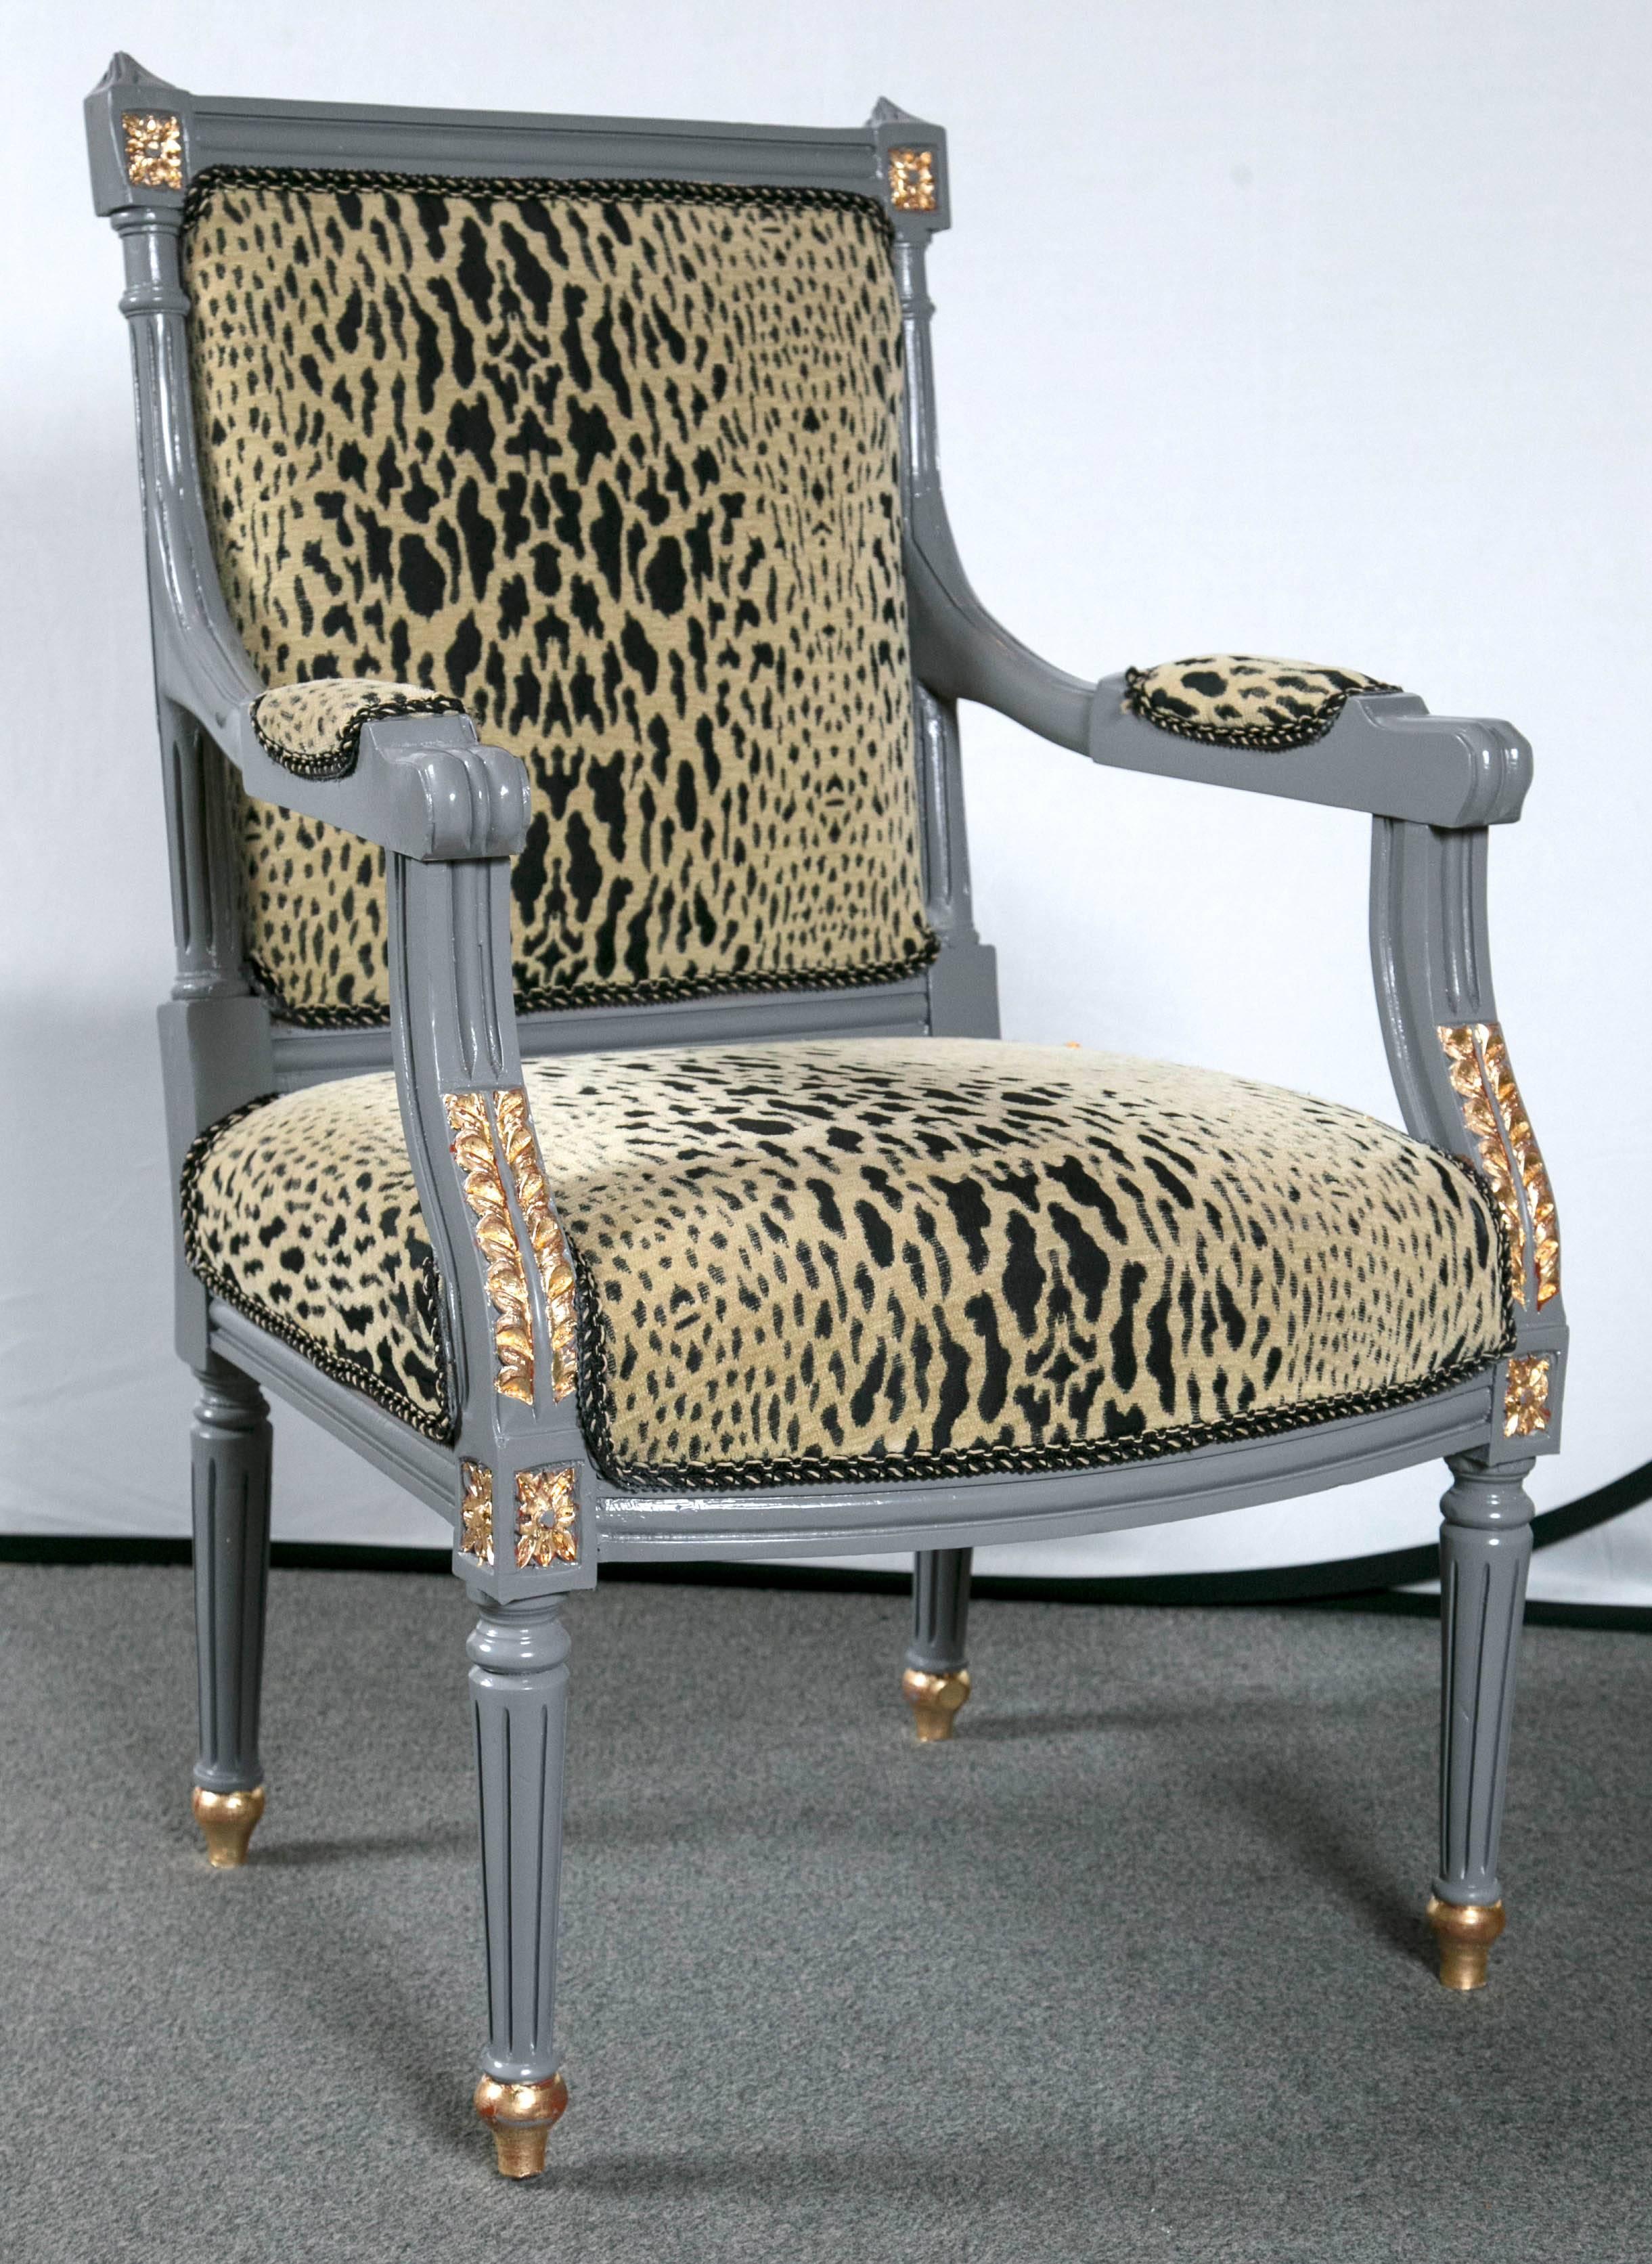 Pair of Louis XVI style fauteuils. The leopard print is cozy and stately. Steel gray and gilt gold style. Jansen. Steel gray painted with bronze sabots and decorative flower motifs. The subtle claw arm has fabric on the armrest. A pretty pair.